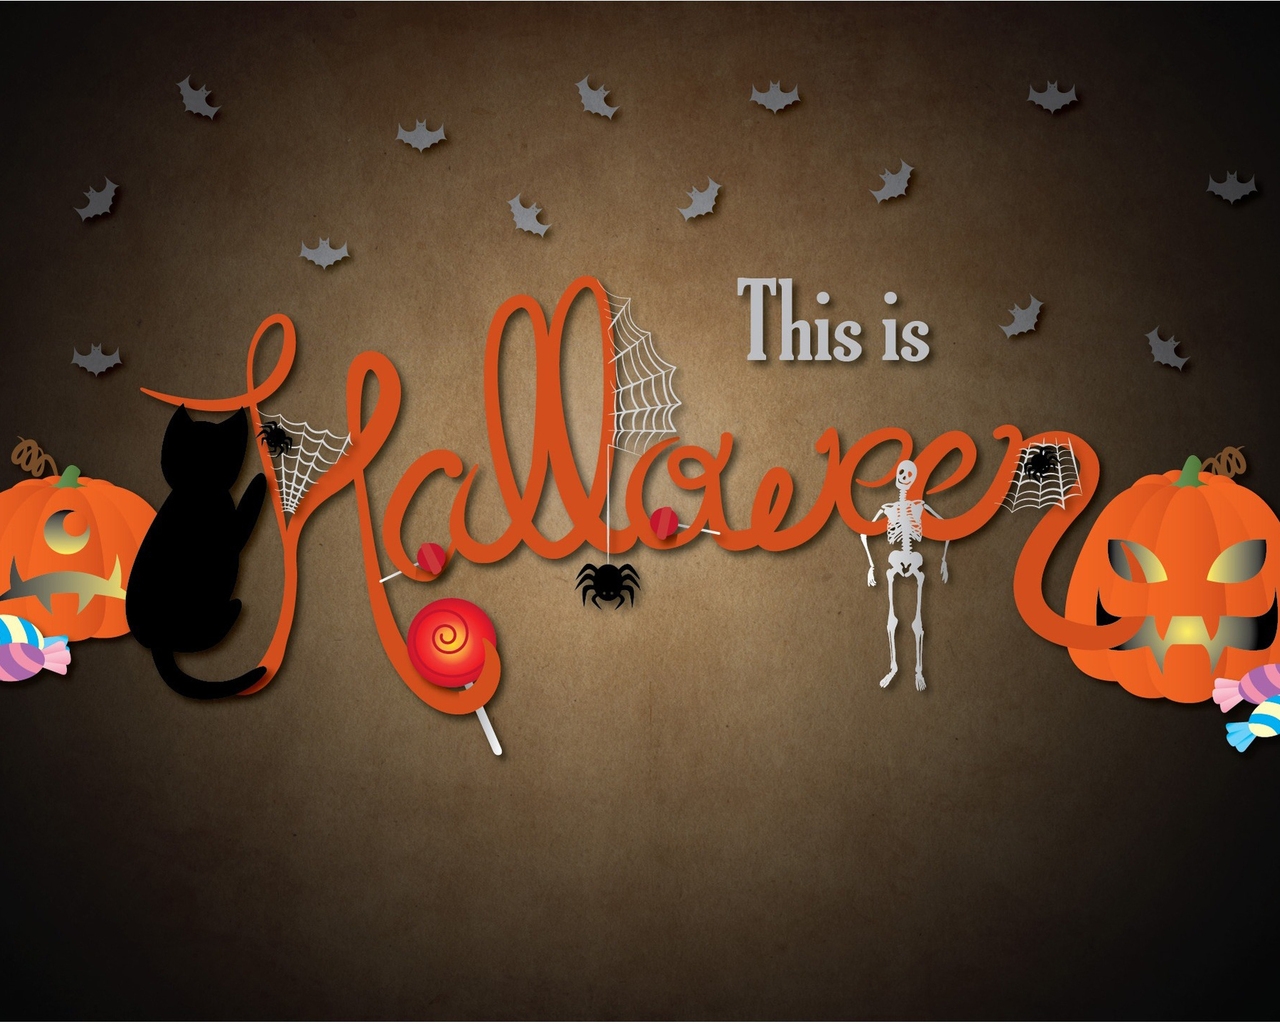 This is Halloween for 1280 x 1024 resolution